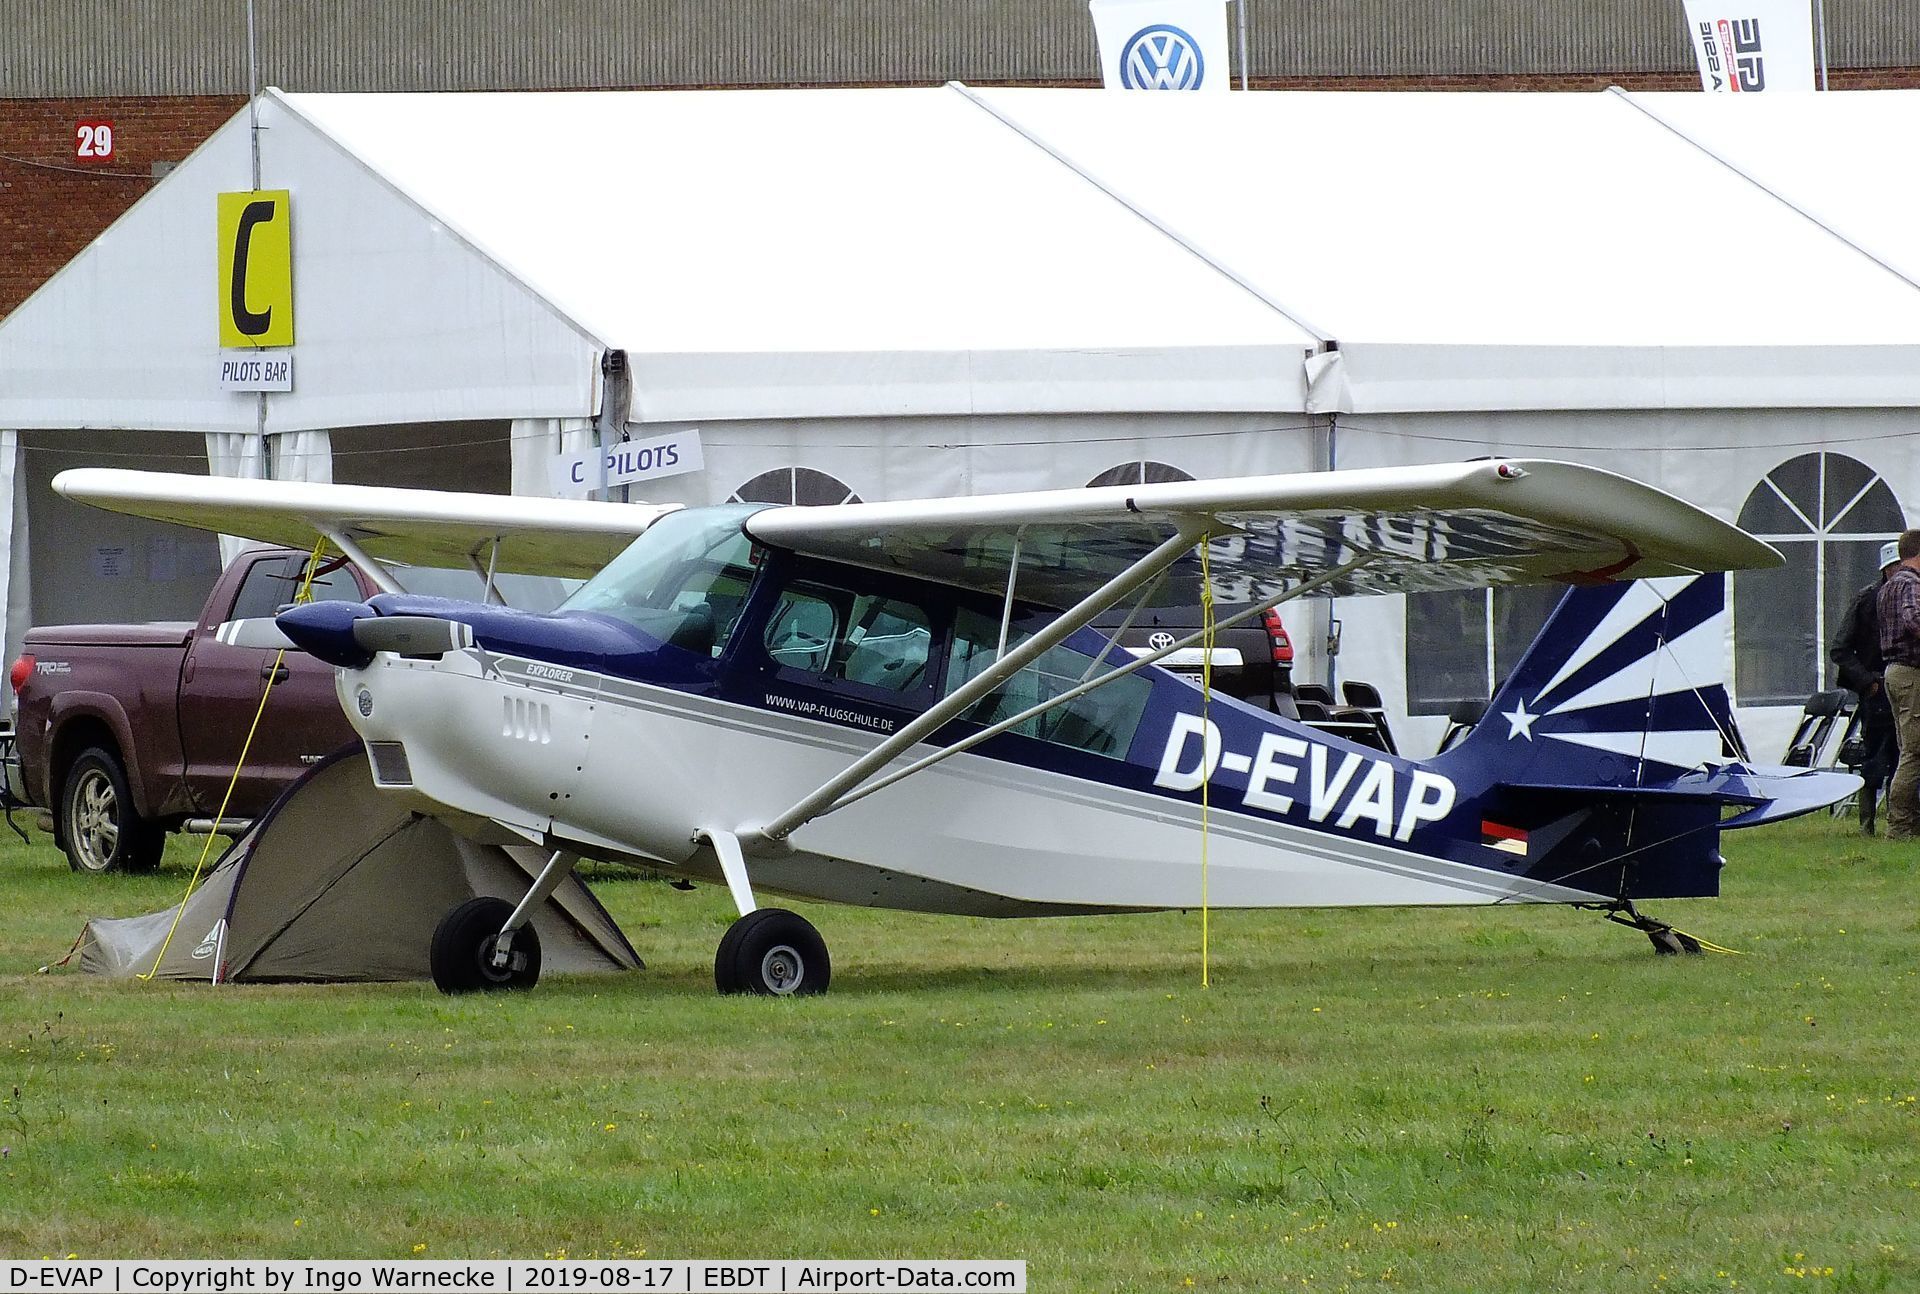 D-EVAP, 2008 American Champion 7GCBC C/N 1451-2008, American Champion 7GCBC Explorer at the 2019 Fly-in at Diest/Schaffen airfield